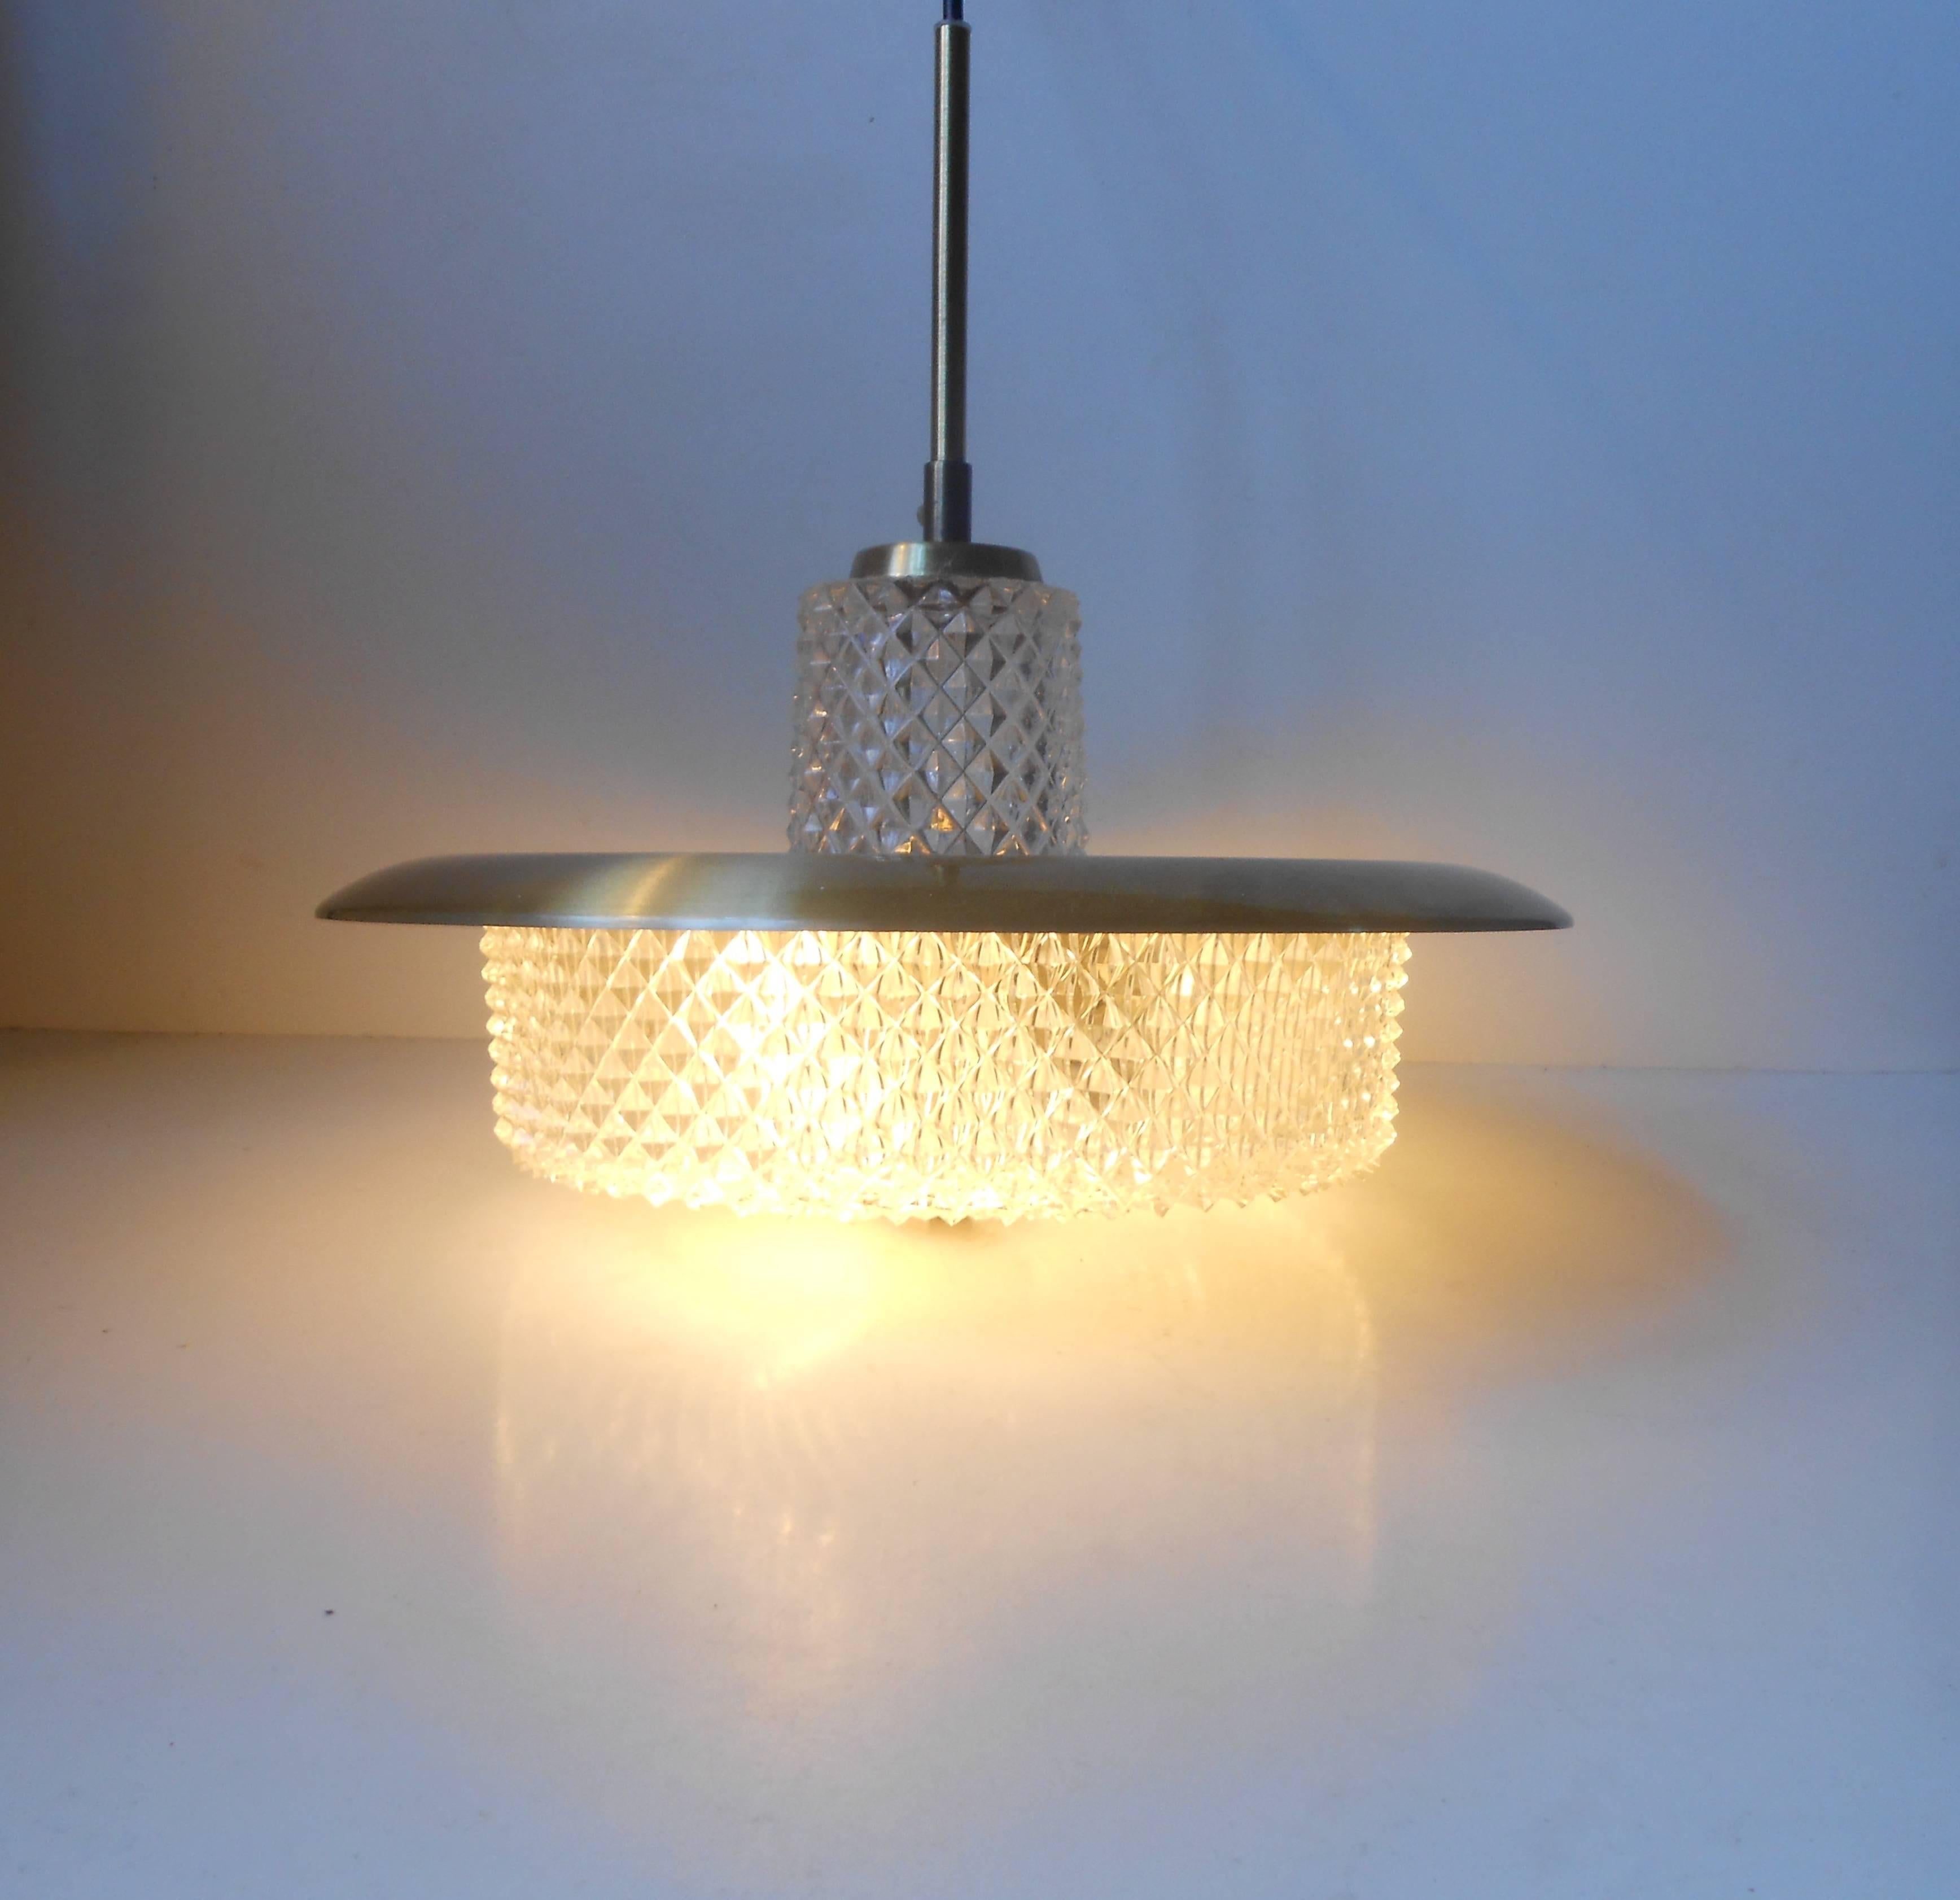 Molded Carl Fagerlund Brass and Crystal Pendant Lamp Orrefors Sweden Mid-Century Modern